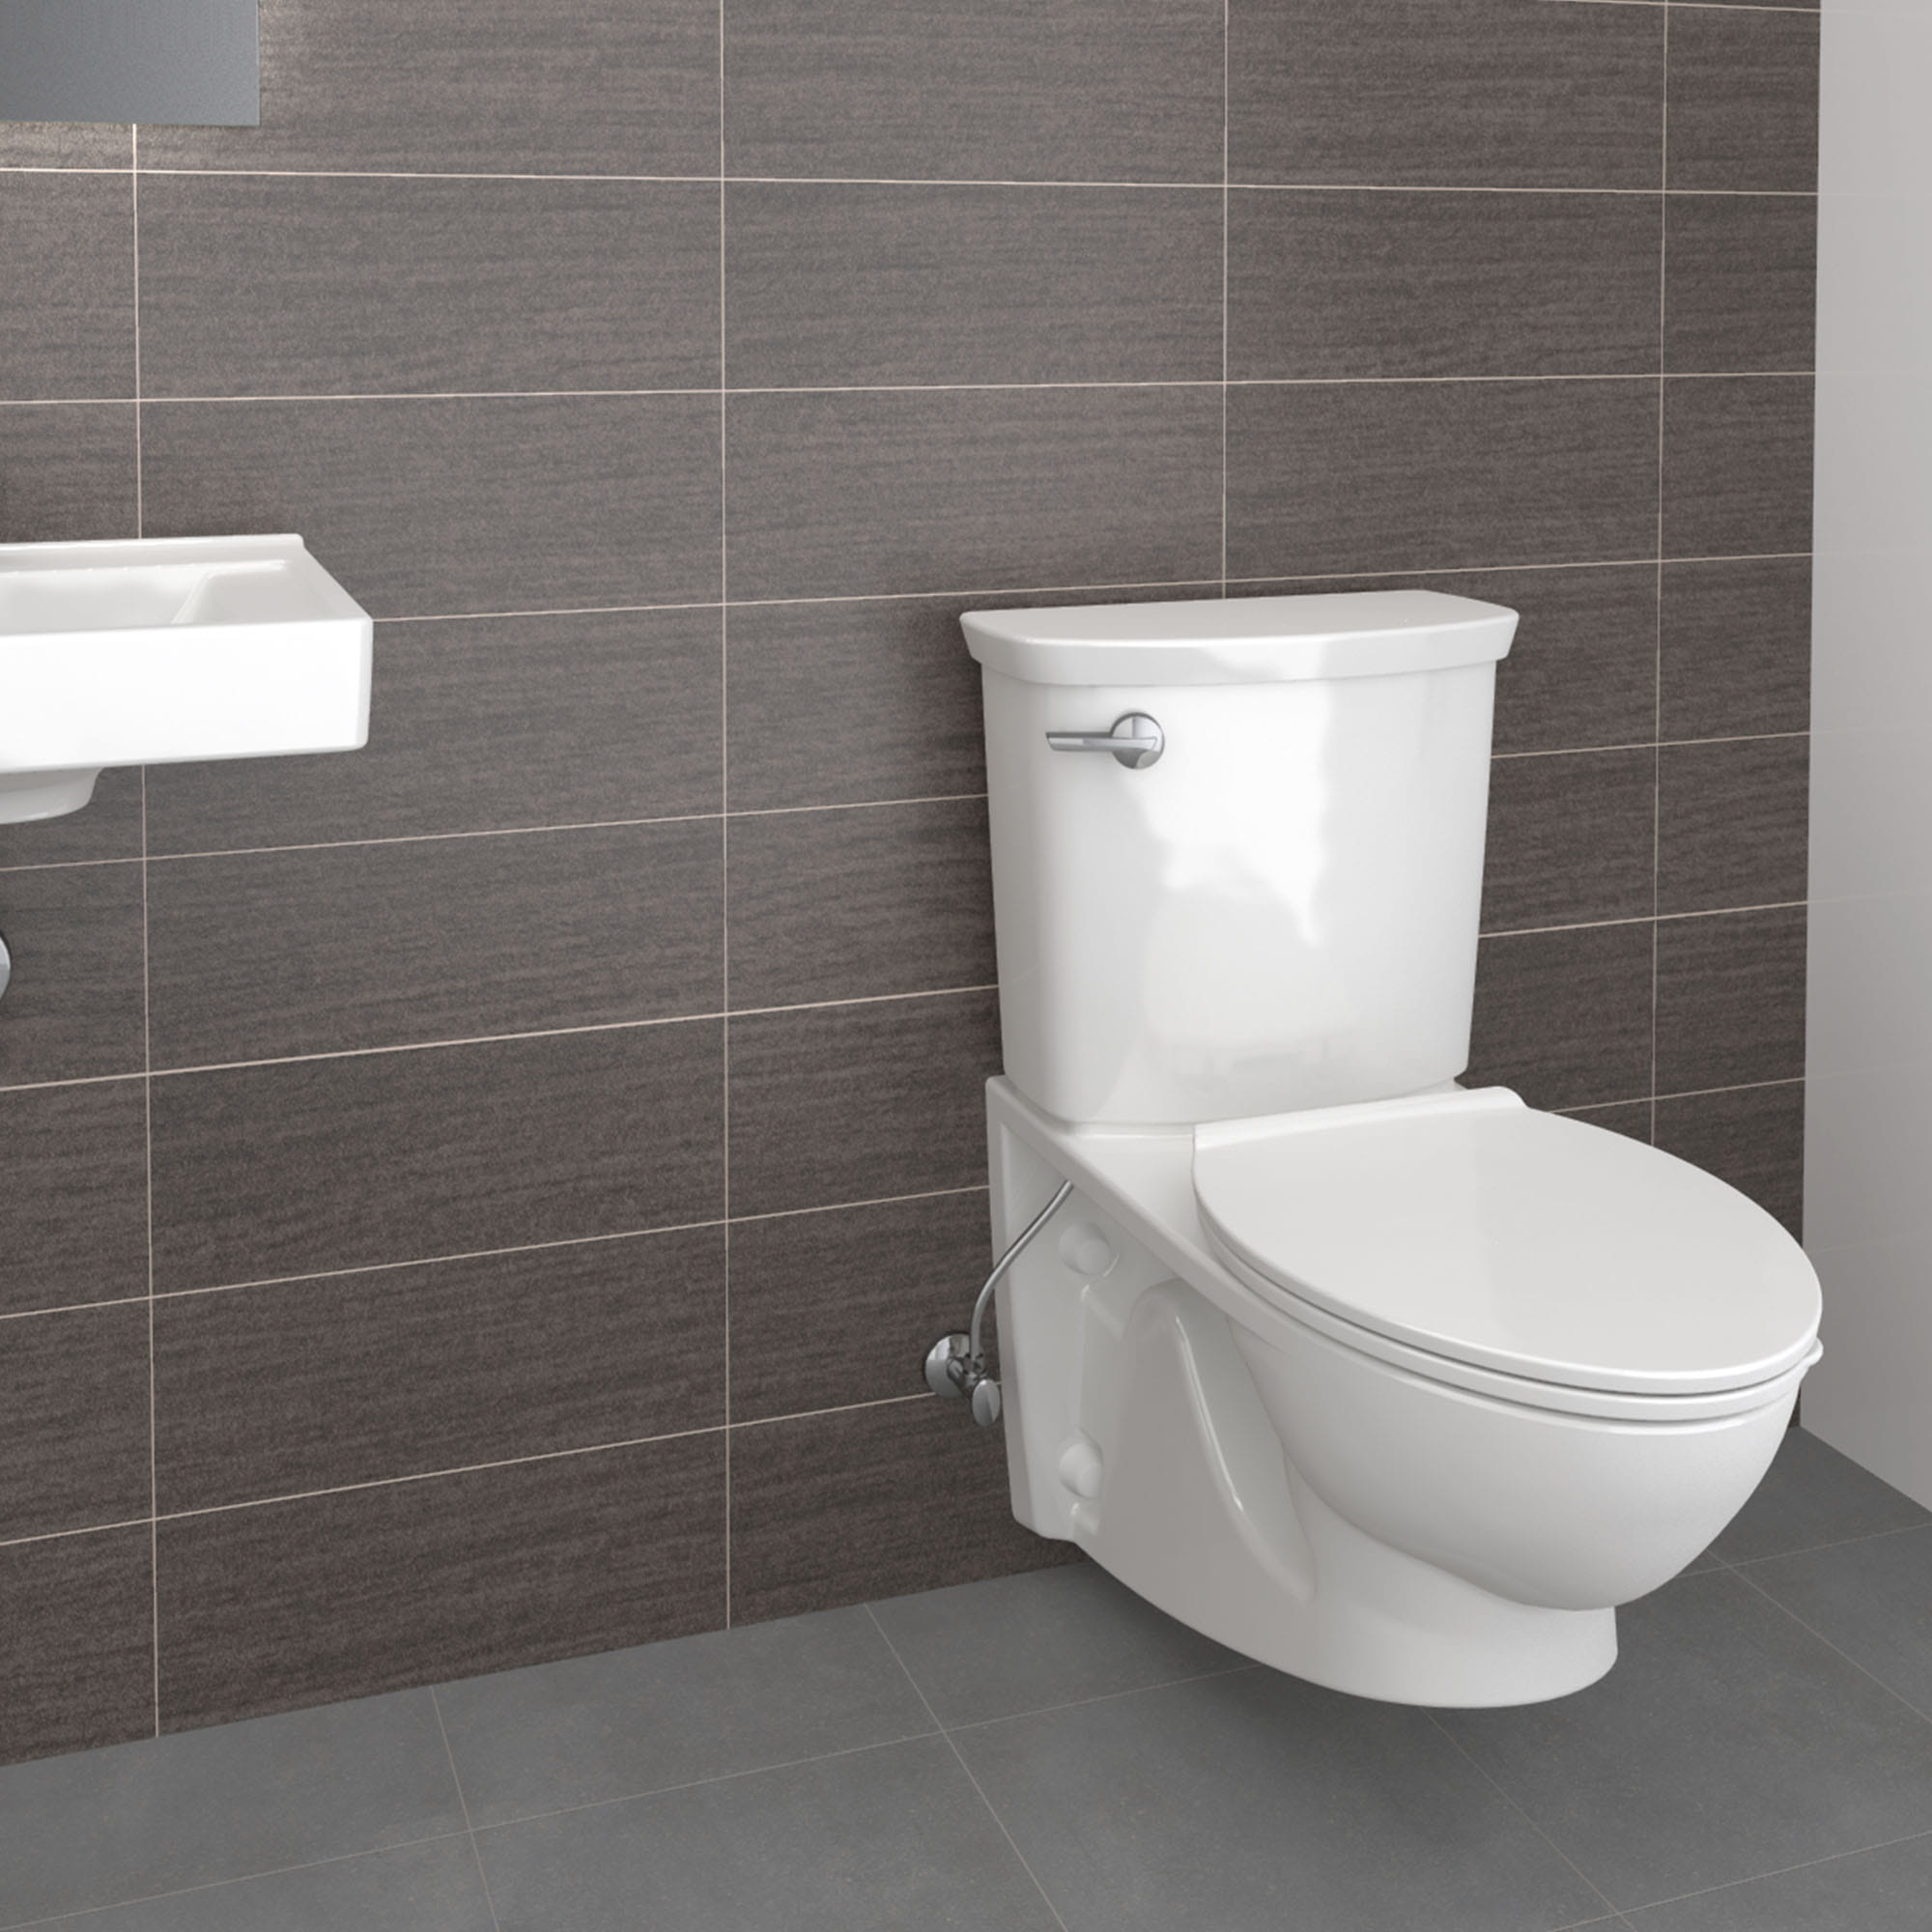 Glenwall® VorMax® Two-Piece 1.28 gpf/4.8 Lpf Back Outlet Elongated Wall-Hung EverClean® Toilet